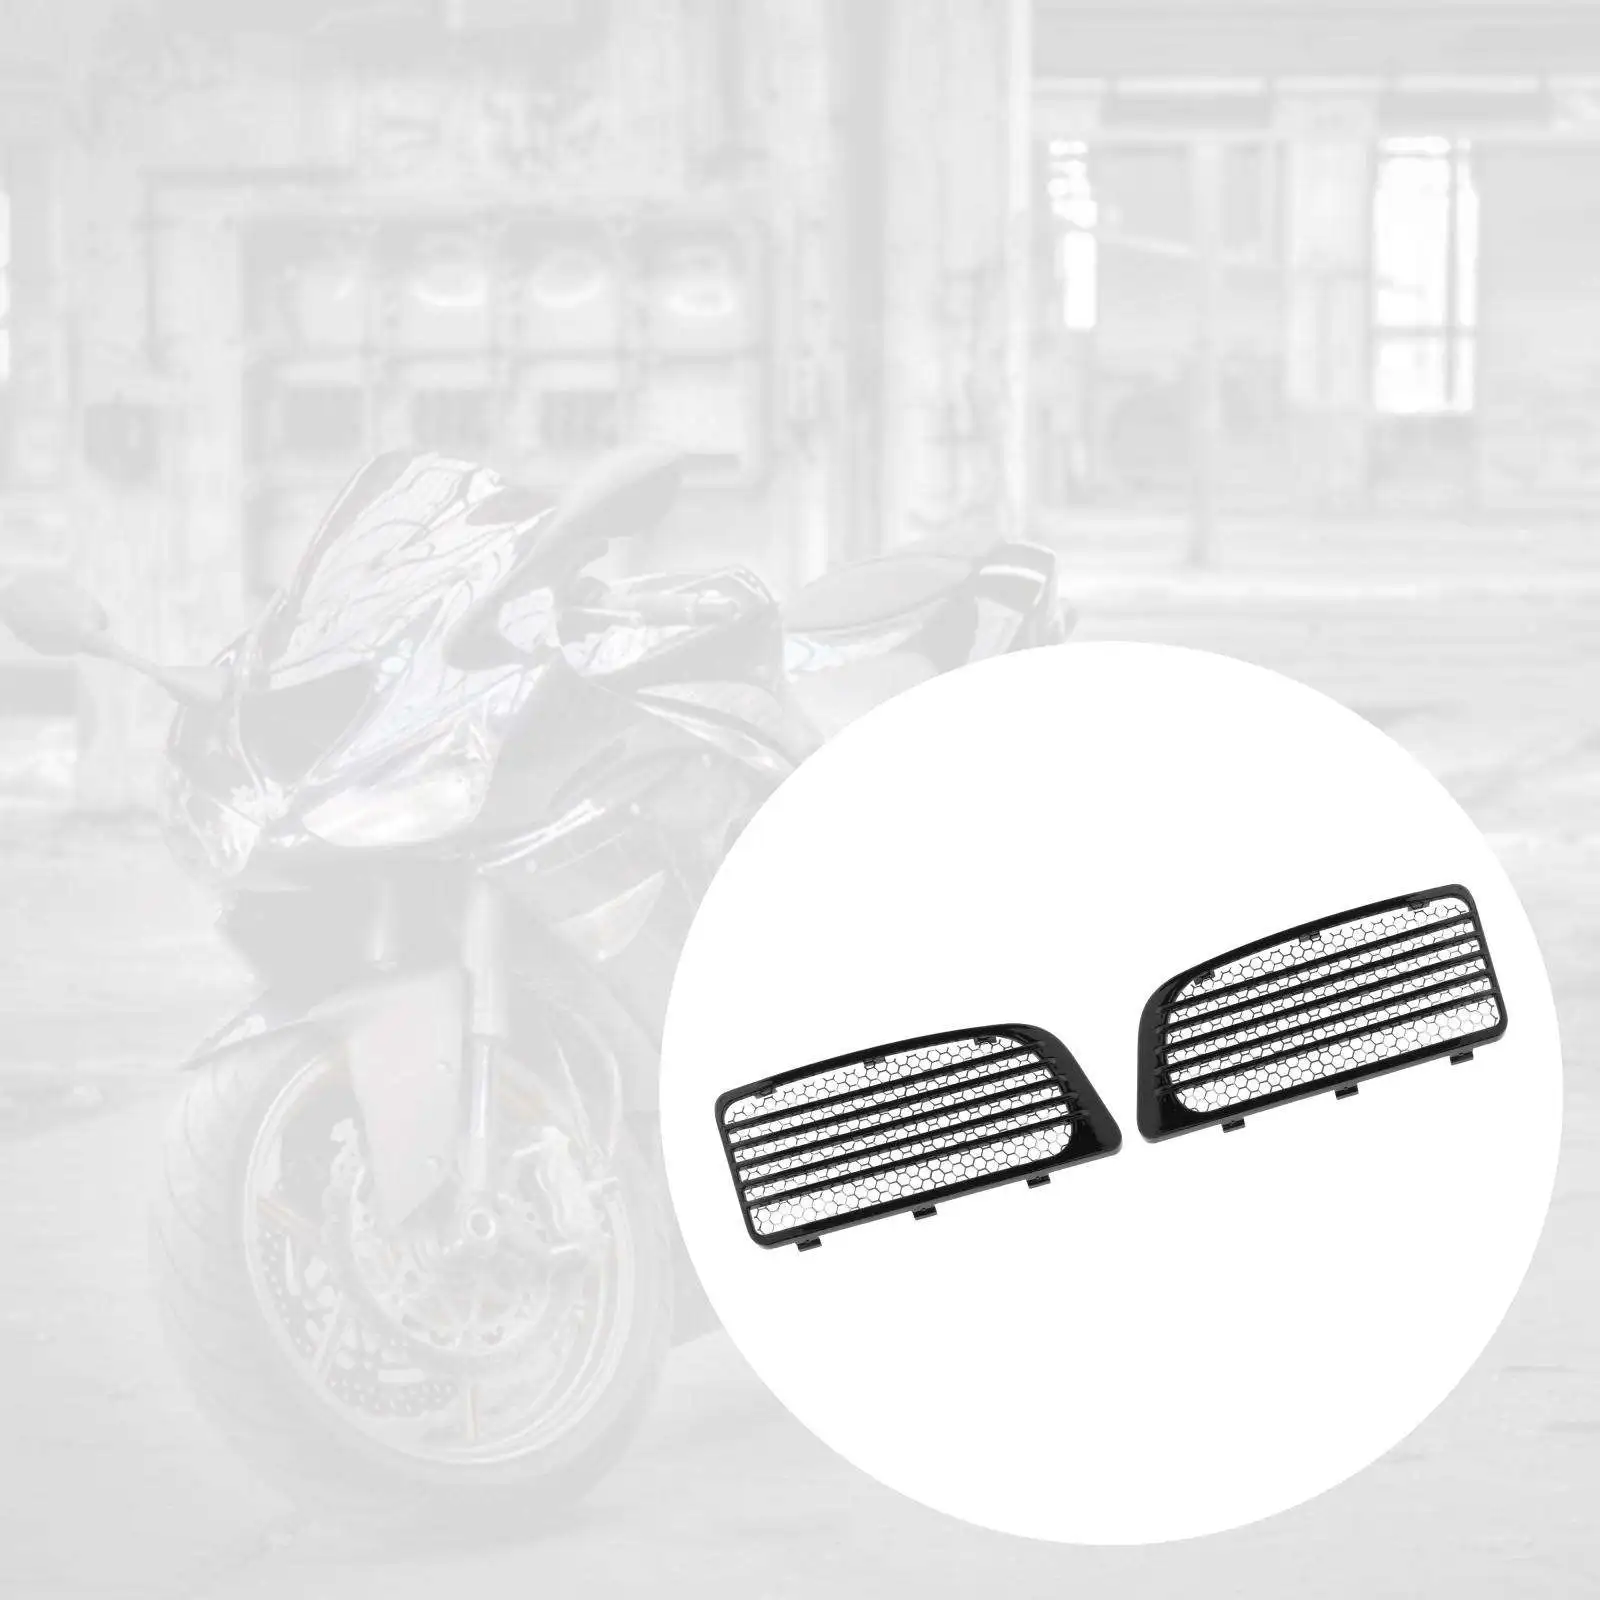 Radiator Grills Fit for  Touring Twin Cooled 14+ Parts Accessories